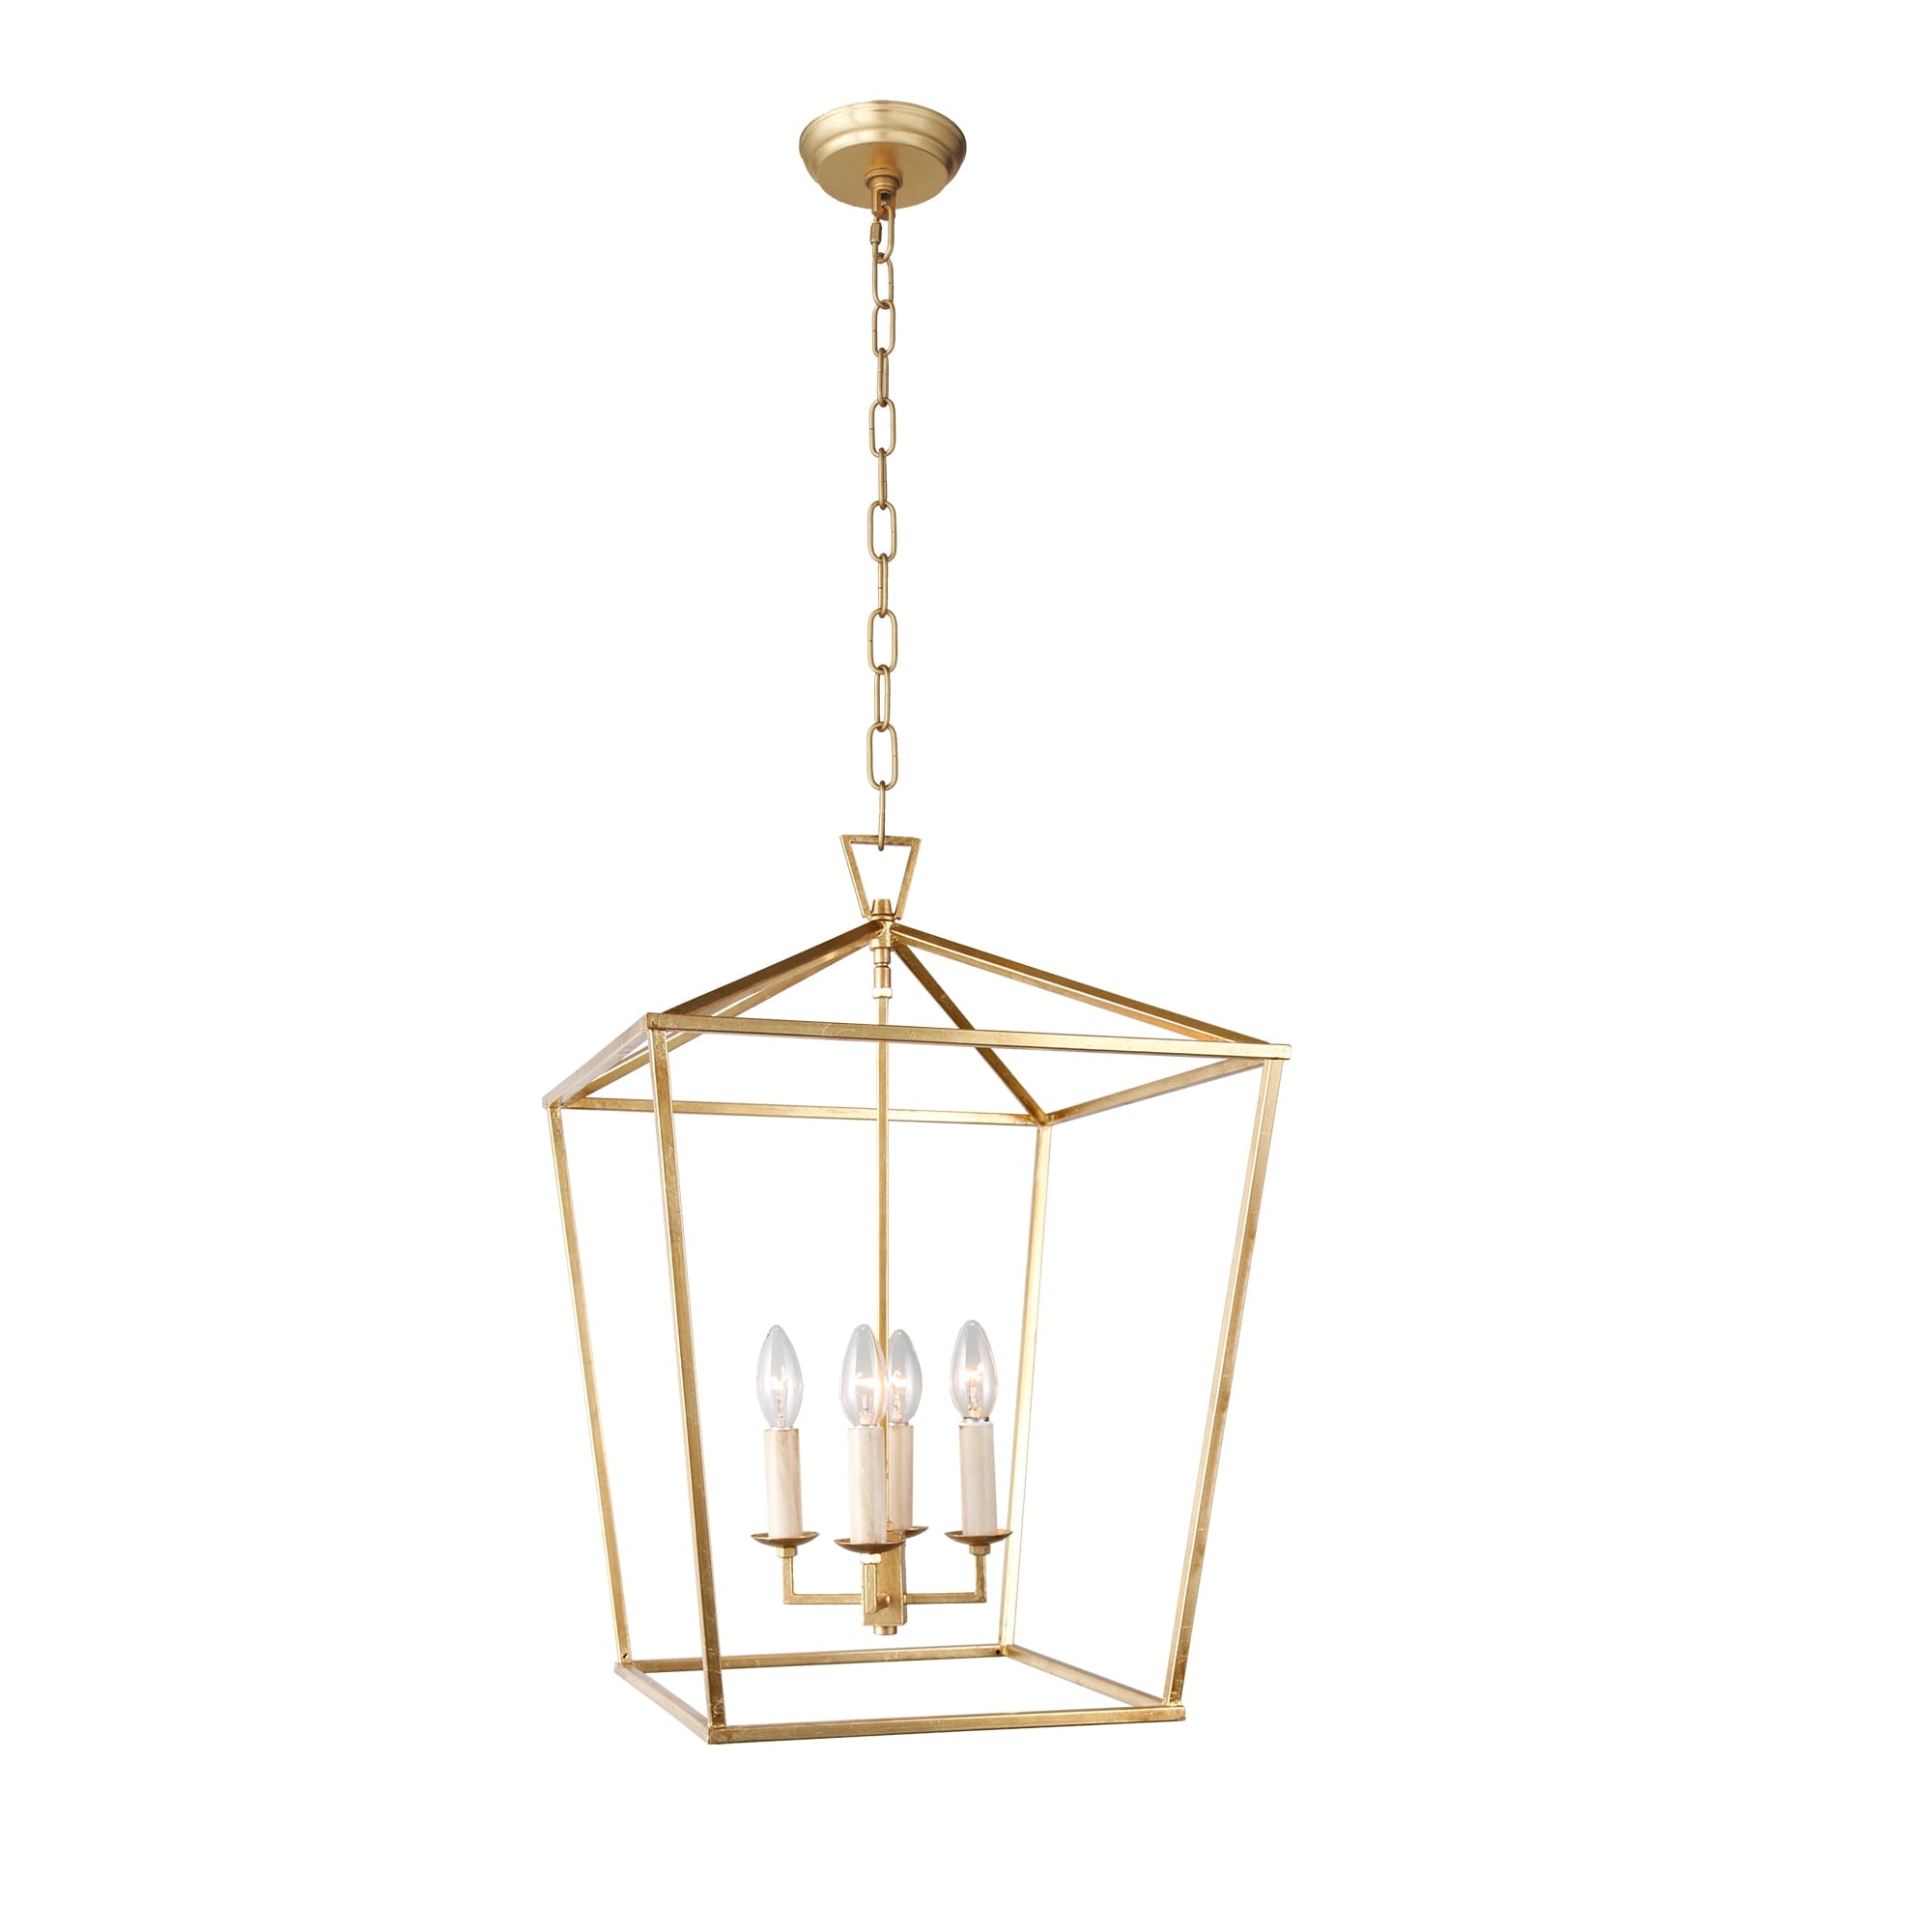 4 Light Caged Chandelier in Gold Finish